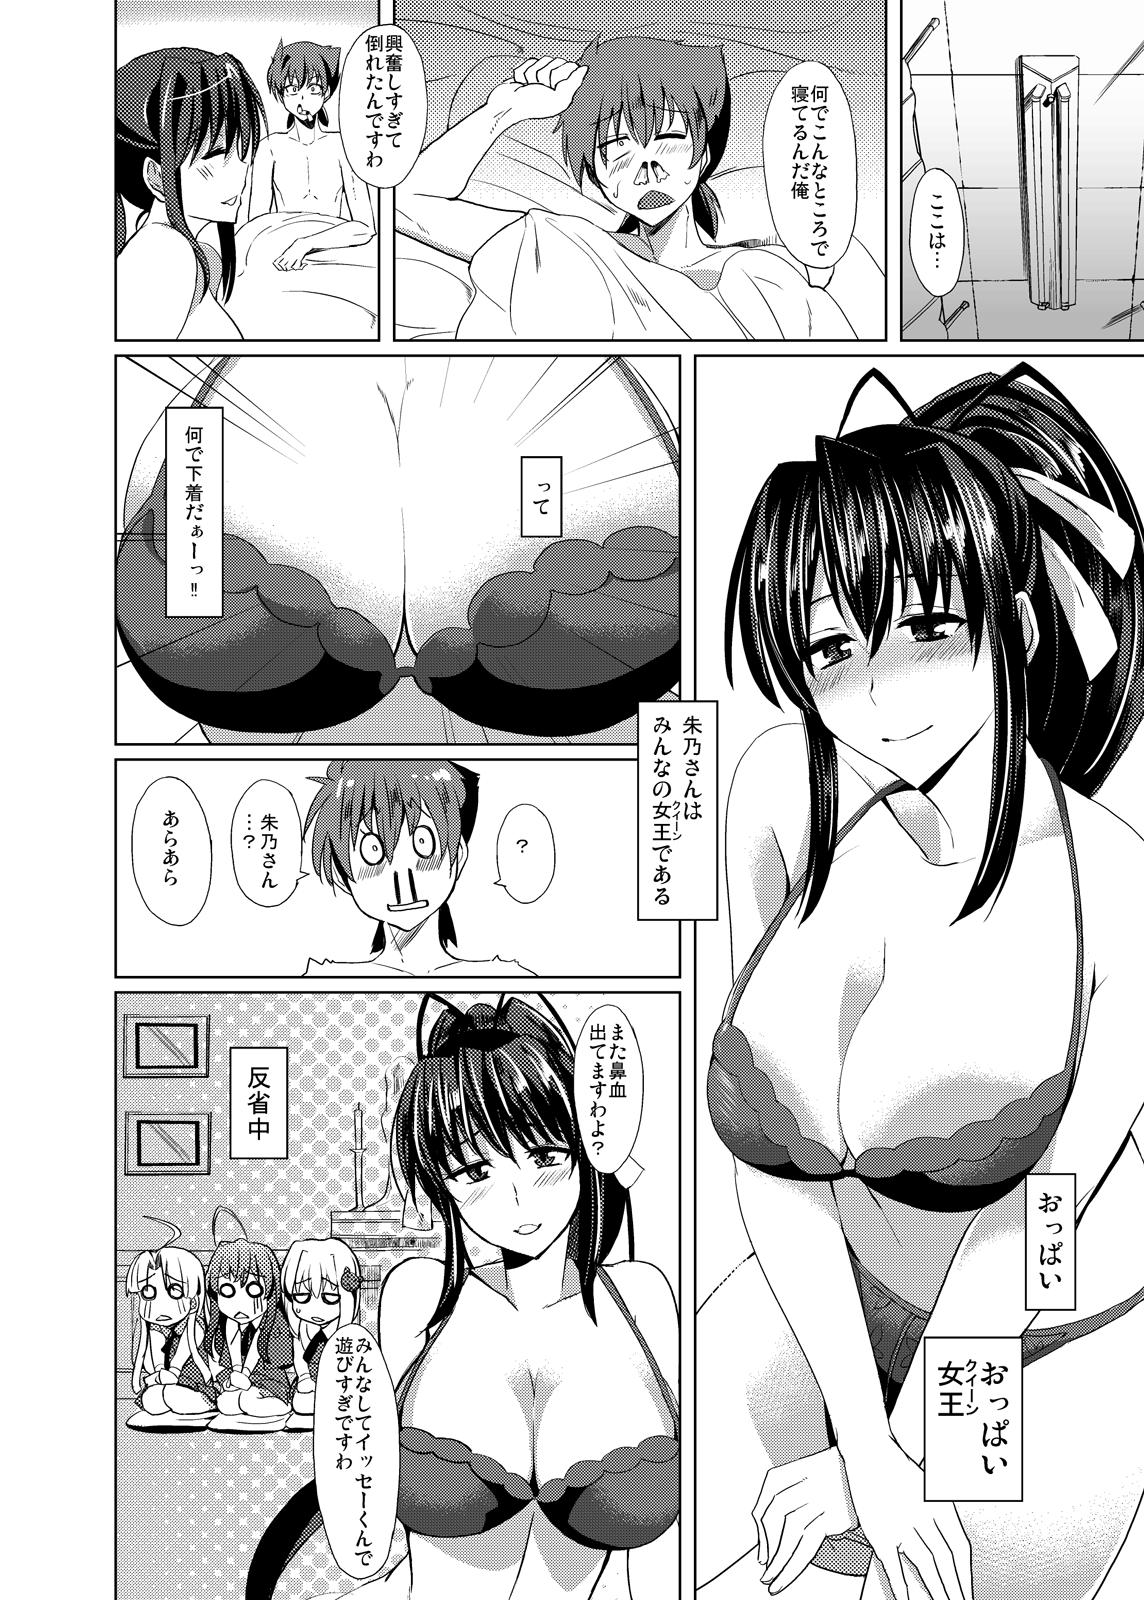 Boquete Akeno-san to DxD - Highschool dxd Sucking Cock - Page 4